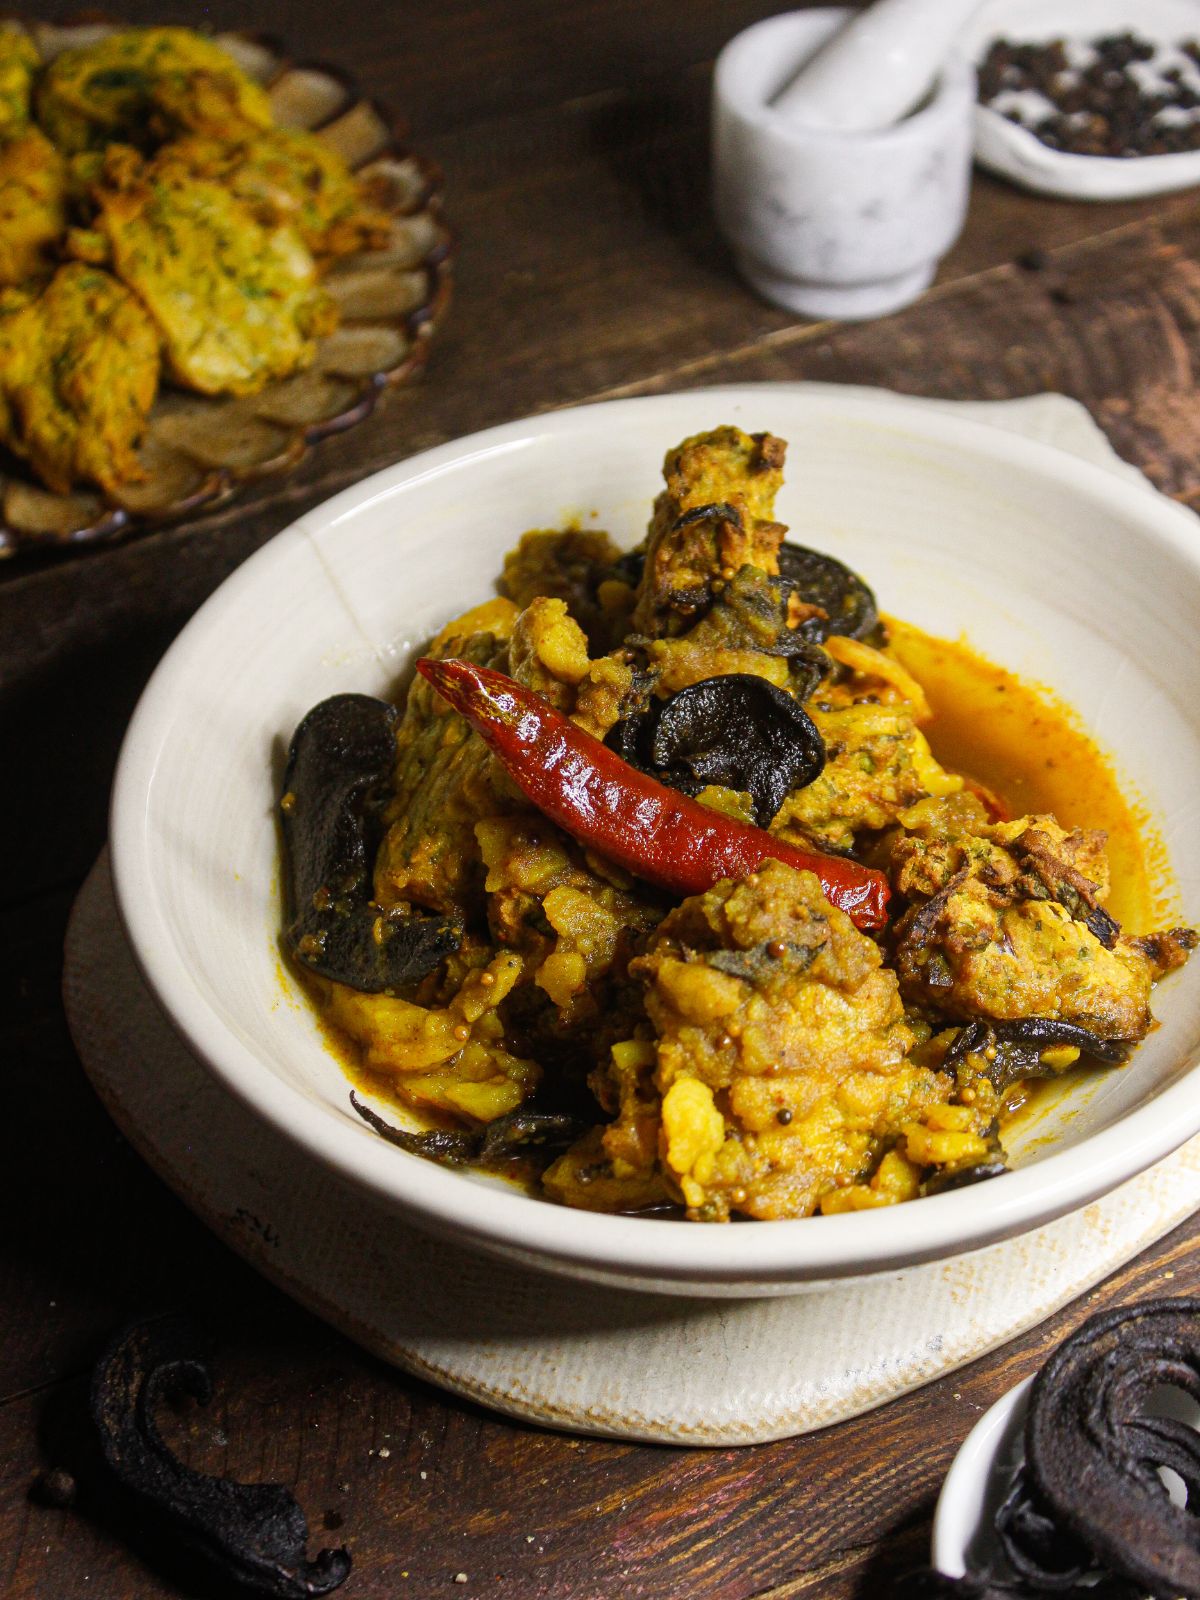 Assamese Boror Tenga: Sour Curry with Fritters ready to enjoy with rice or rotis 